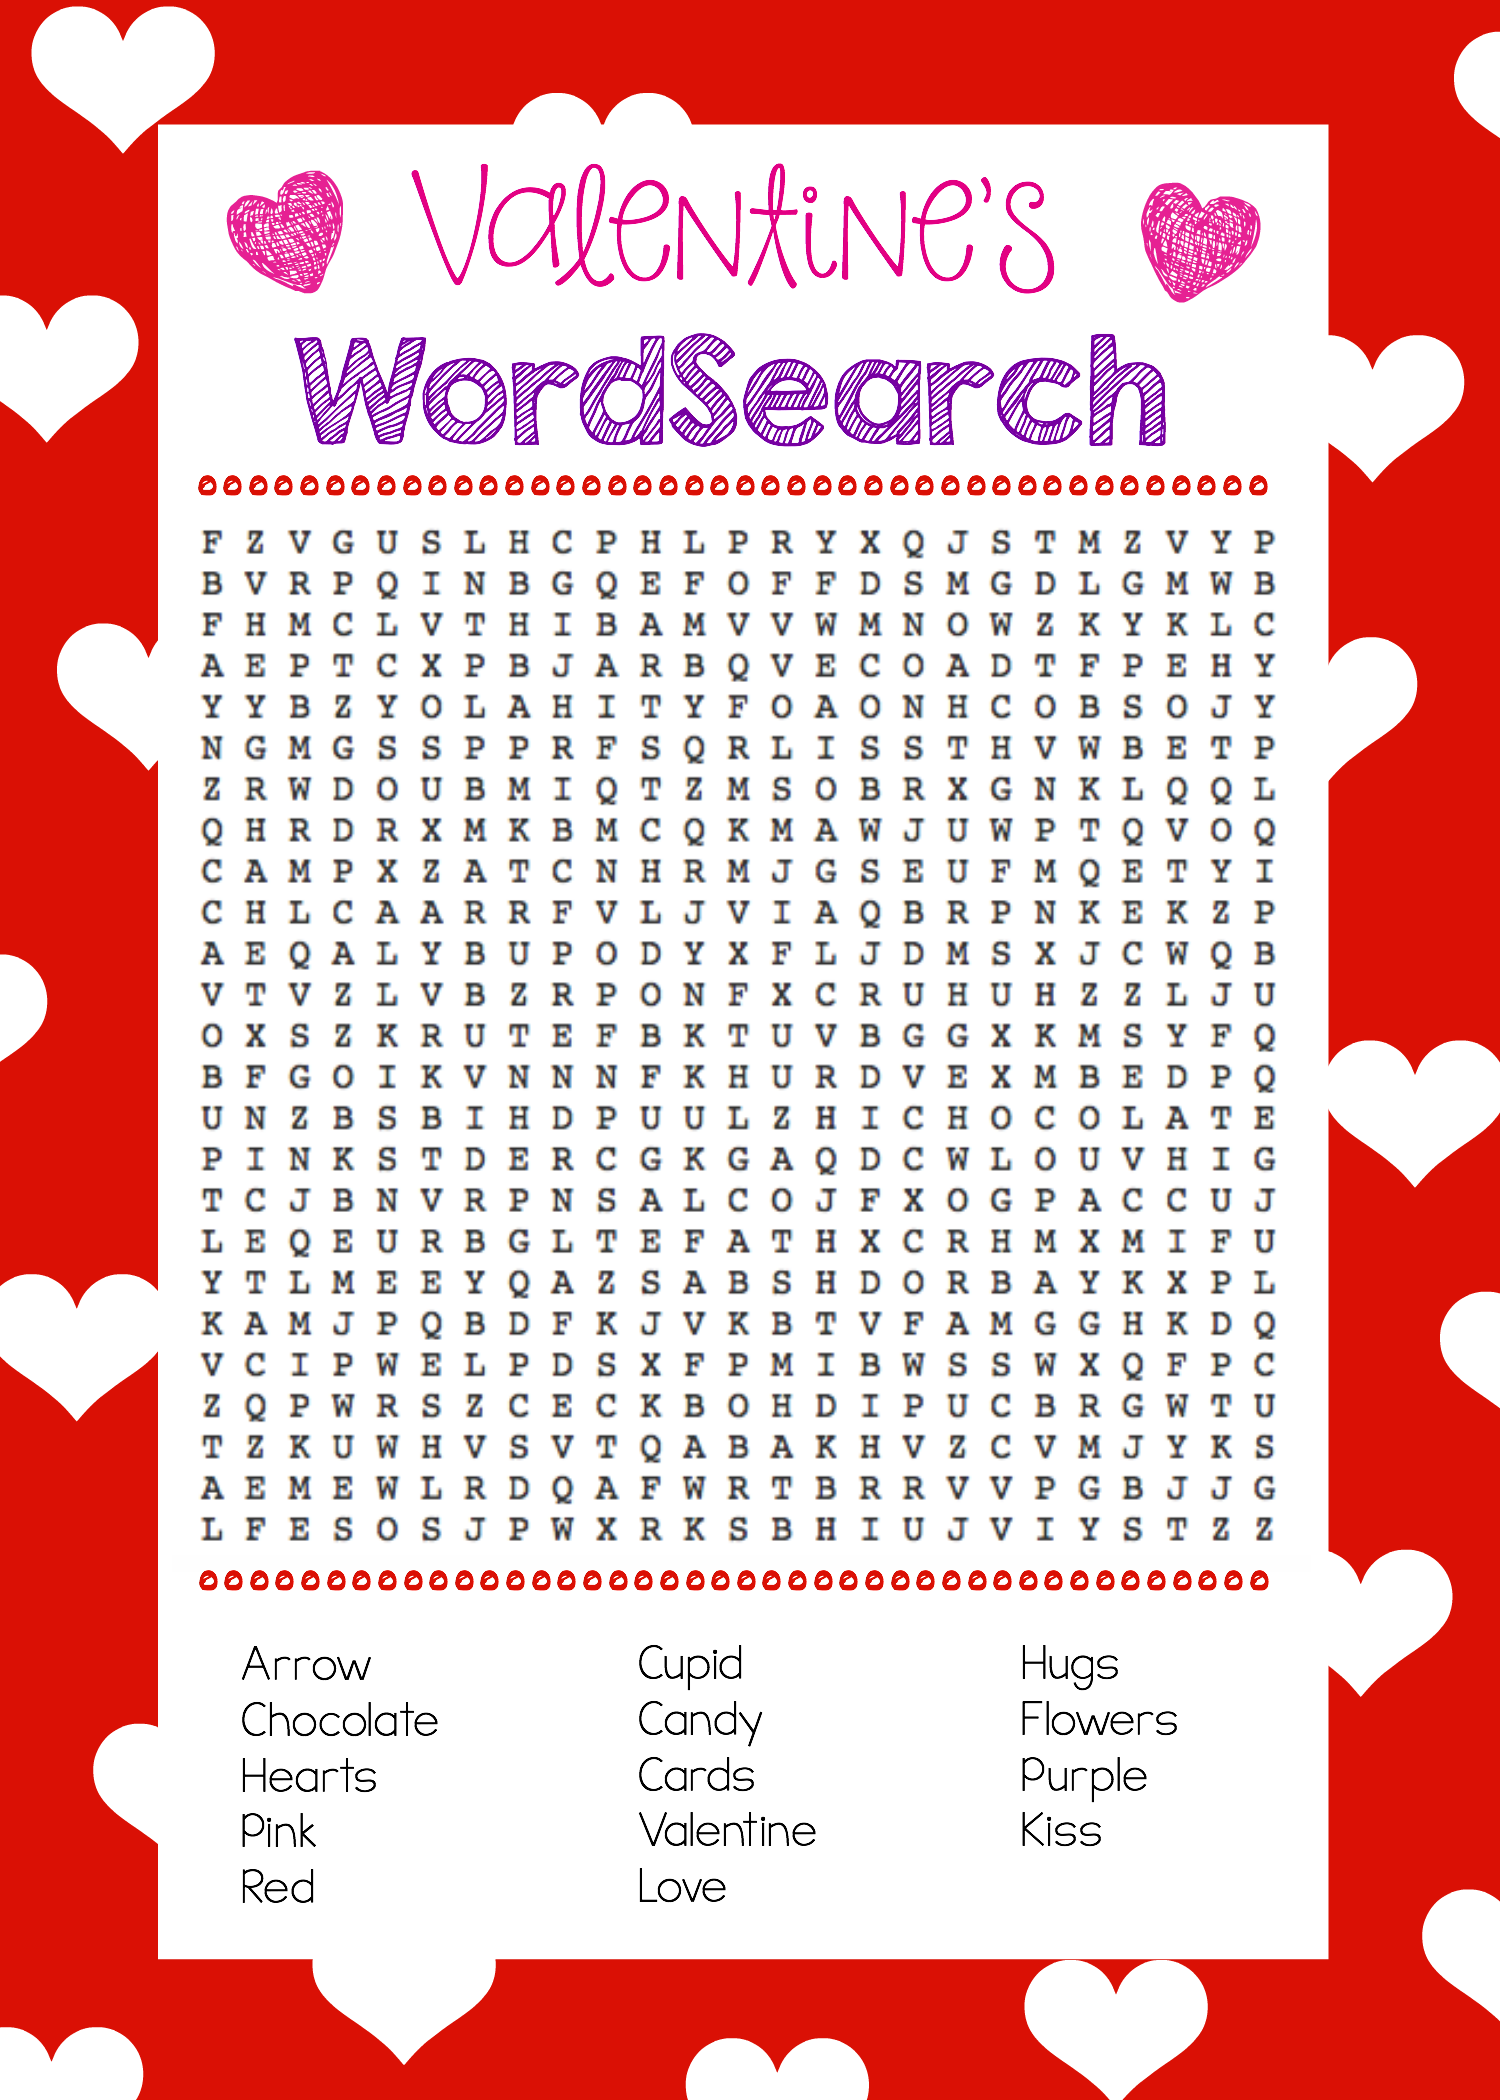 Free Printable Valentine's Day Word Search